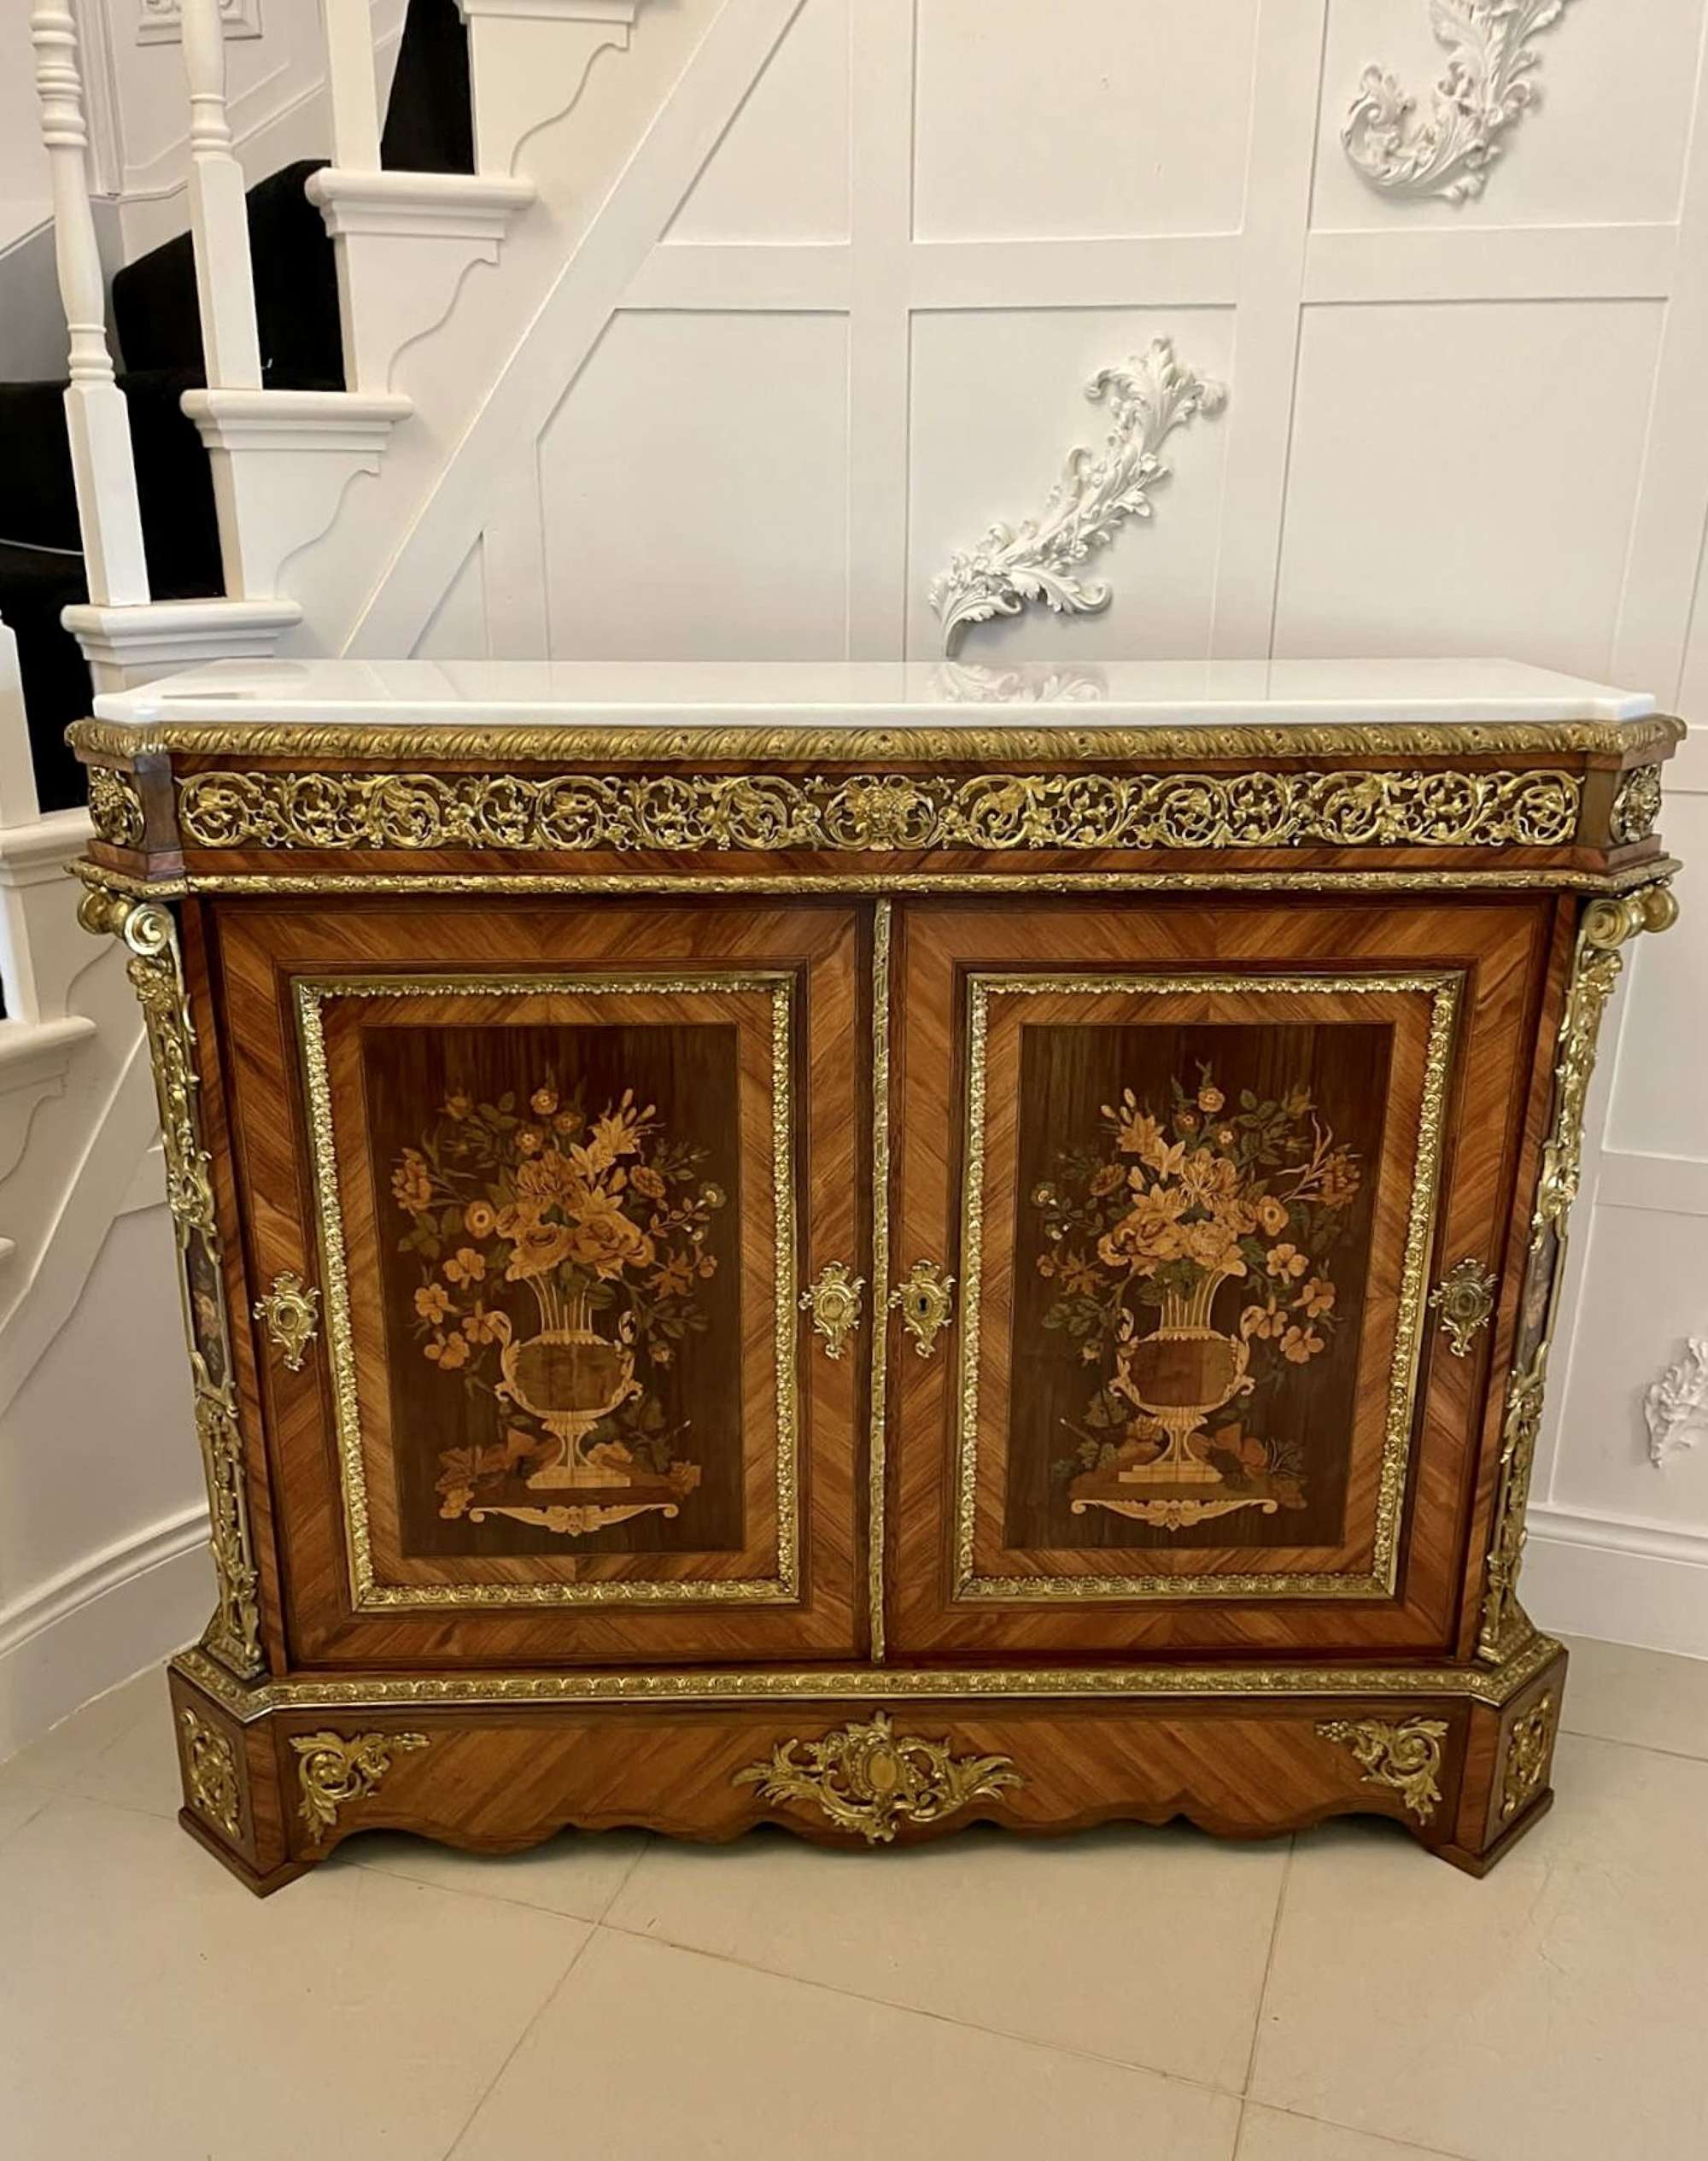 Exhibition Quality Antique French Kingwood Floral Marquetry Ormolu Mounted Side Cabinet